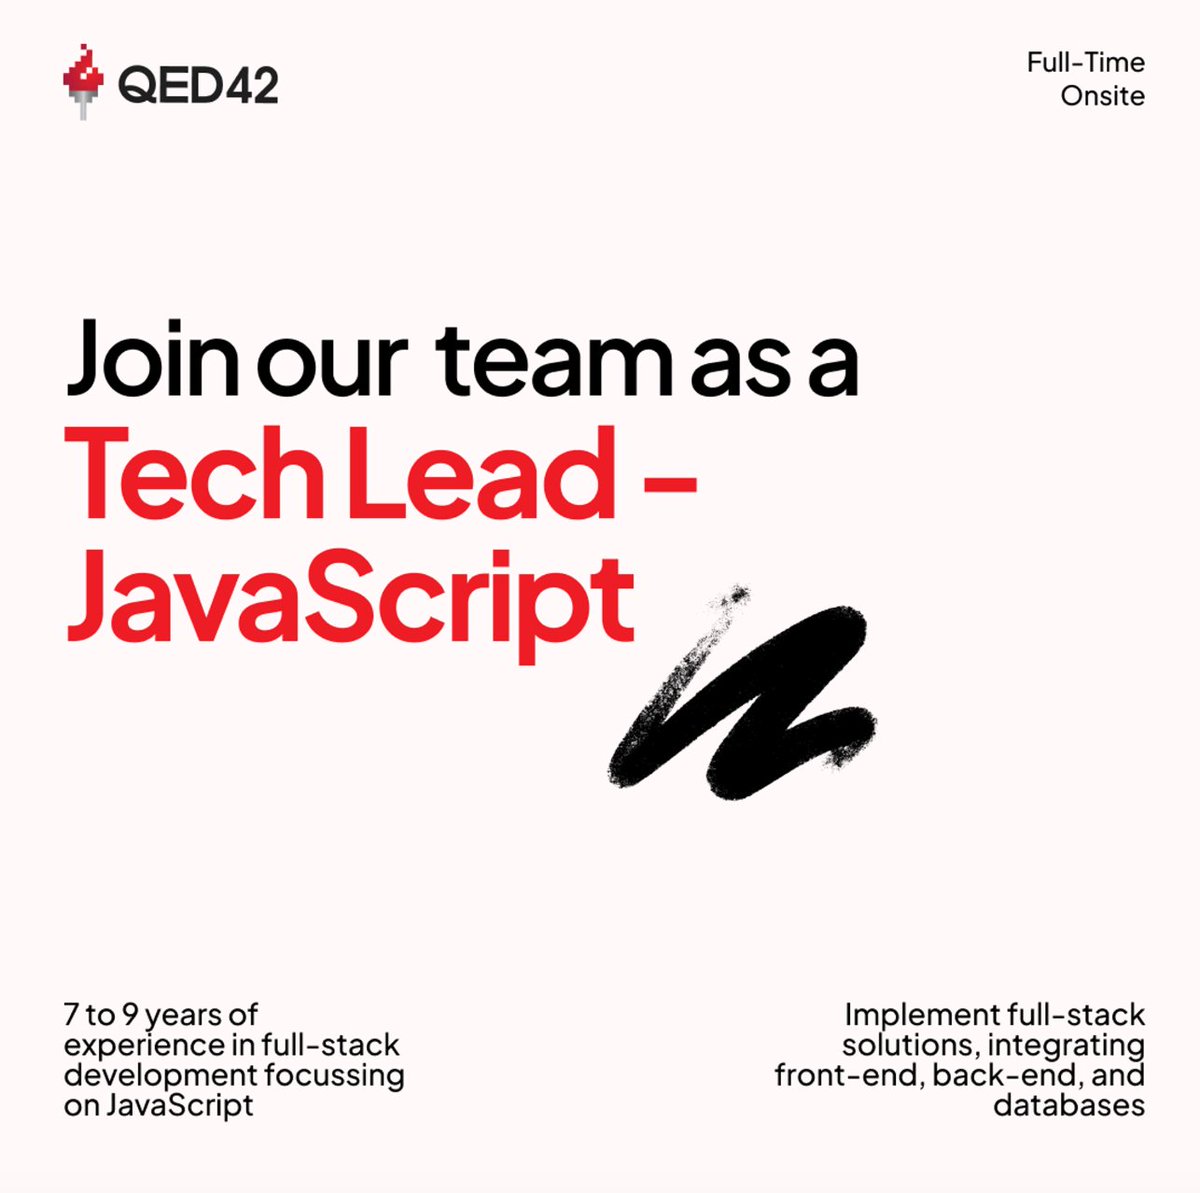 We are looking for a Tech Lead - JavaScript! Experience: 7-9 years Location: Pune, Maharashtra, India Employment Type: Full-Time 🔗Apply here: smrtr.io/jN9nq #Hiring #OpenPositions #PeopleofQED42